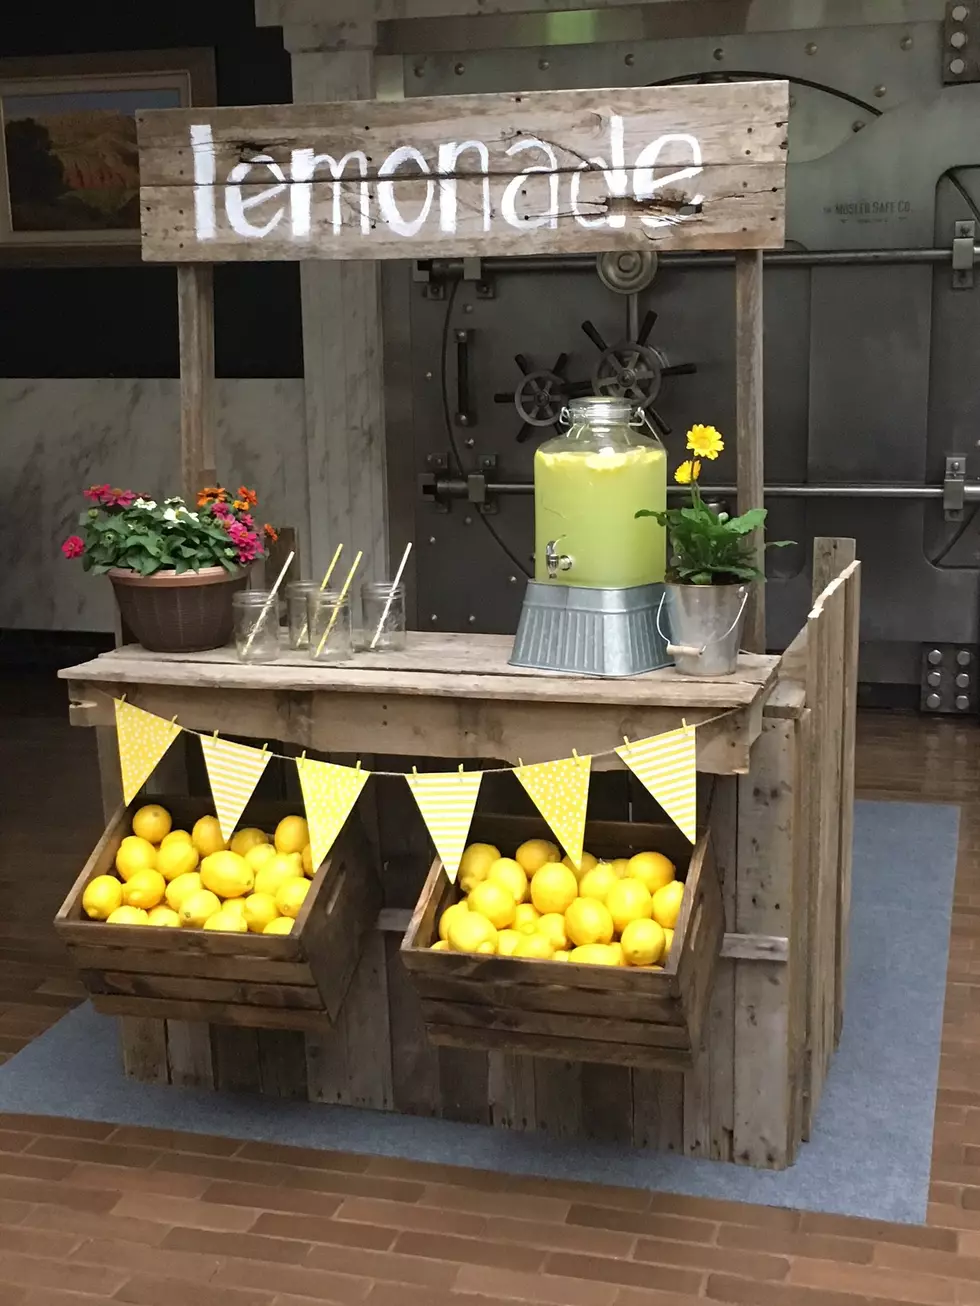 Lemonade Day Amarillo is This Saturday &#8211; Where You Need to Go